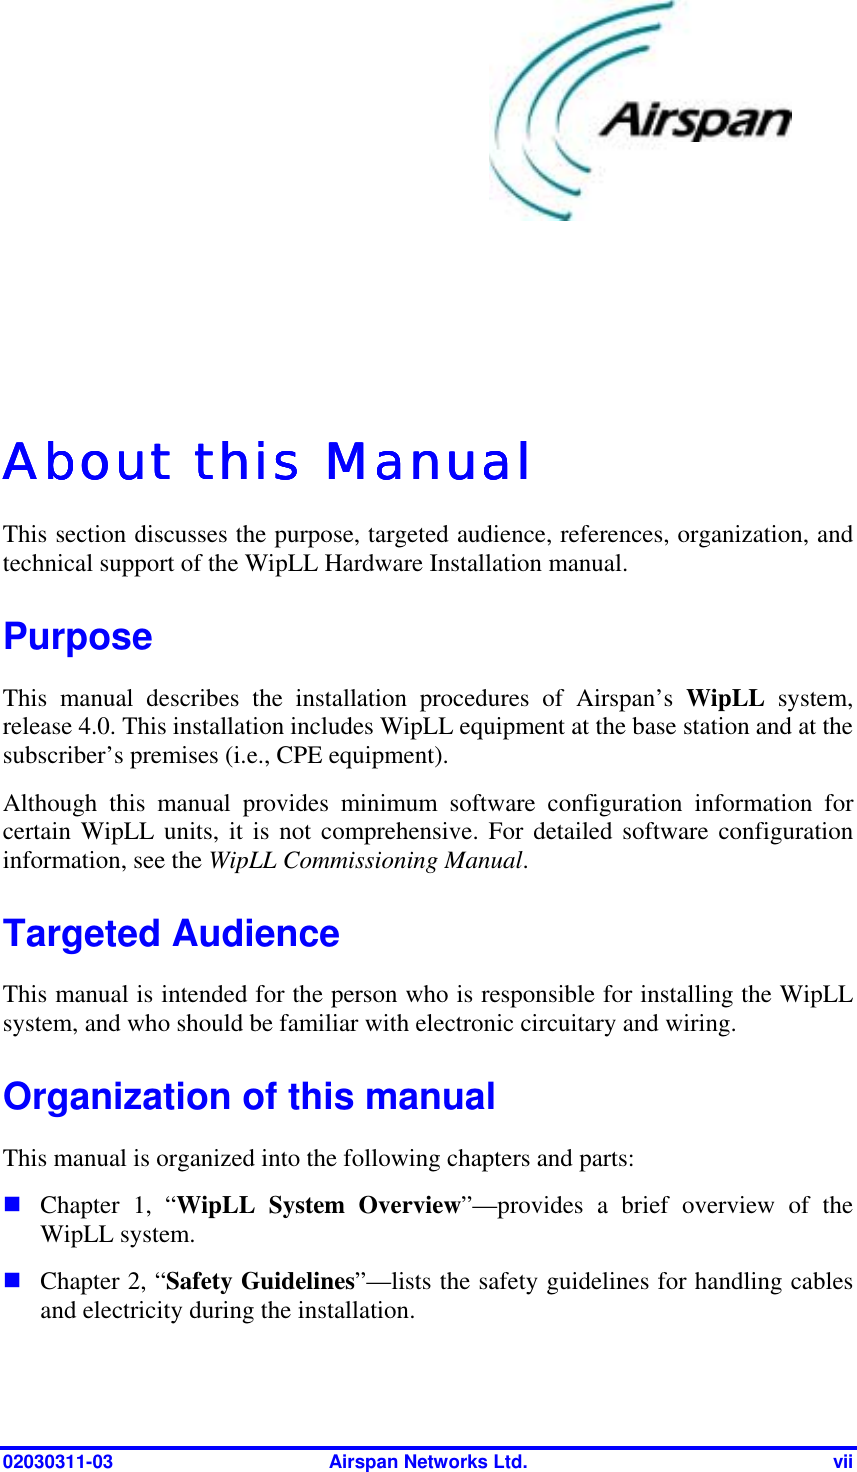  02030311-03  Airspan Networks Ltd.  vii   About this ManualAbout this ManualAbout this ManualAbout this Manual    This section discusses the purpose, targeted audience, references, organization, and technical support of the WipLL Hardware Installation manual.  Purpose This manual describes the installation procedures of Airspan’s WipLL system, release 4.0. This installation includes WipLL equipment at the base station and at the subscriber’s premises (i.e., CPE equipment). Although this manual provides minimum software configuration information for certain WipLL units, it is not comprehensive. For detailed software configuration information, see the WipLL Commissioning Manual. Targeted Audience This manual is intended for the person who is responsible for installing the WipLL system, and who should be familiar with electronic circuitary and wiring. Organization of this manual This manual is organized into the following chapters and parts: ! Chapter 1, “WipLL System Overview”—provides a brief overview of the WipLL system. ! Chapter 2, “Safety Guidelines”—lists the safety guidelines for handling cables and electricity during the installation.  